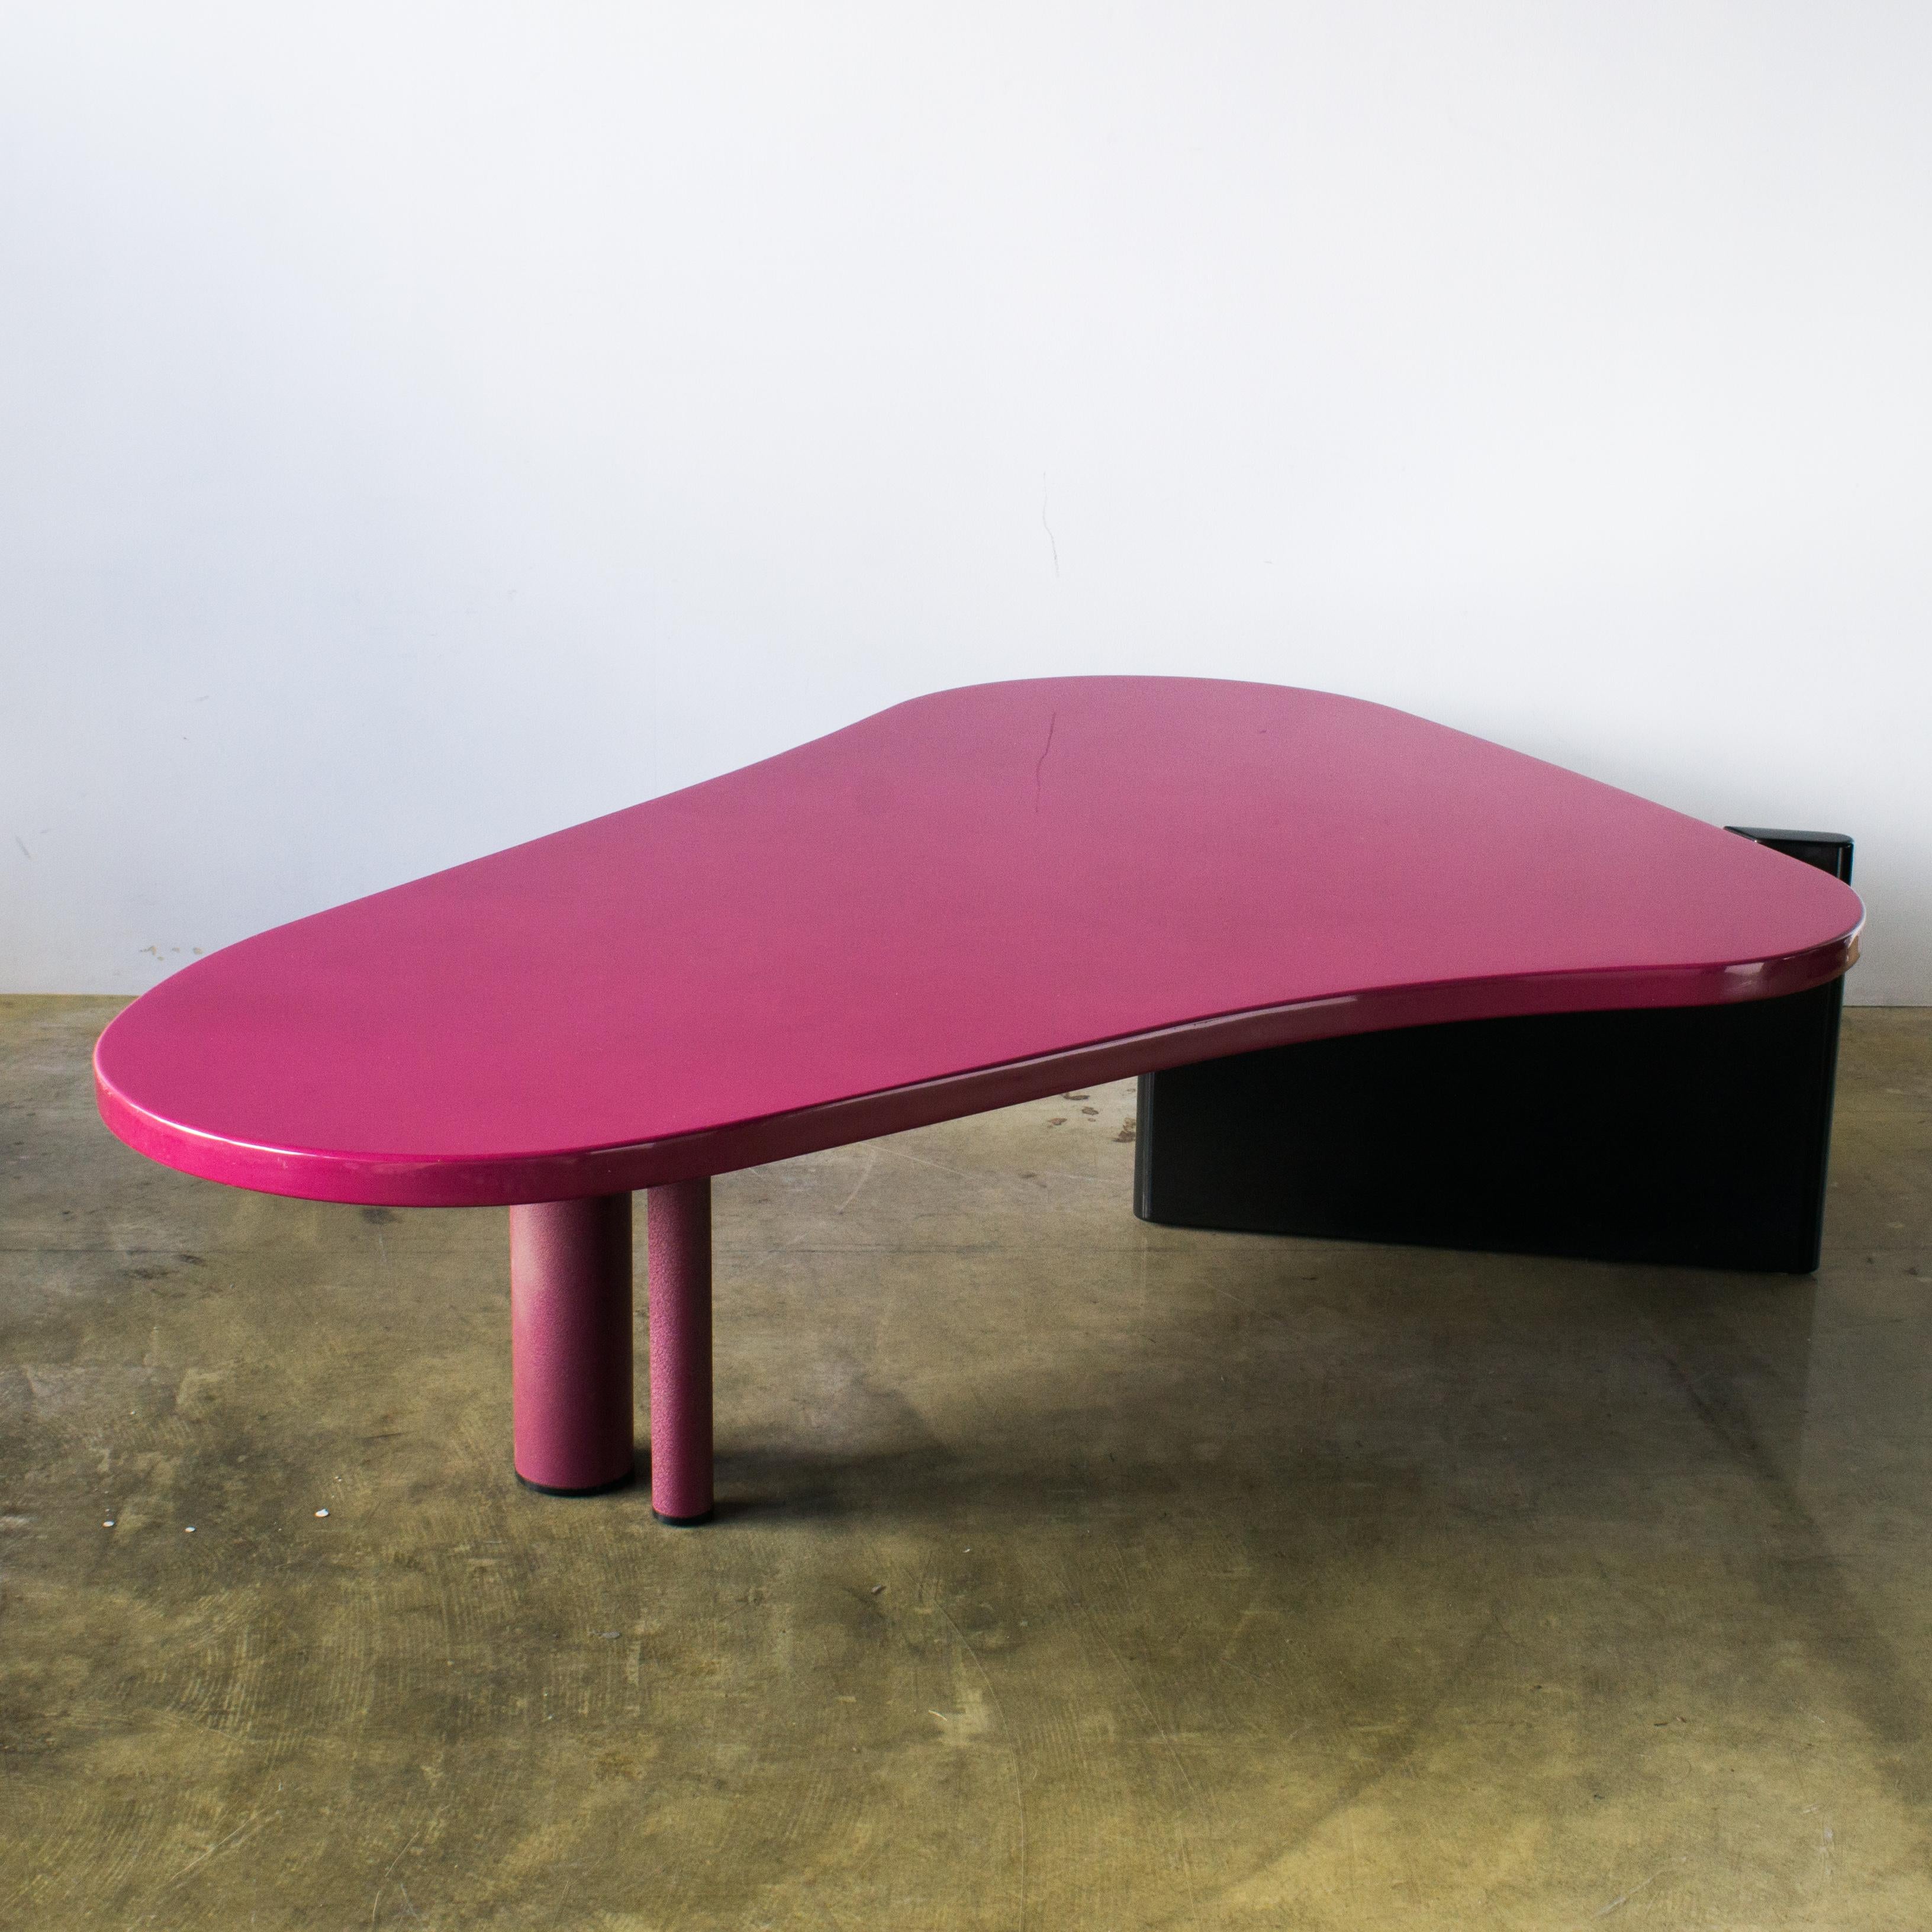 Novel coffee table designed by Maurizio Salvato in 1983. Produced by Saporiti Italia. Rounded triangle-like unique board.
Pink painted board on black painted leg and two pink aluminium legs.